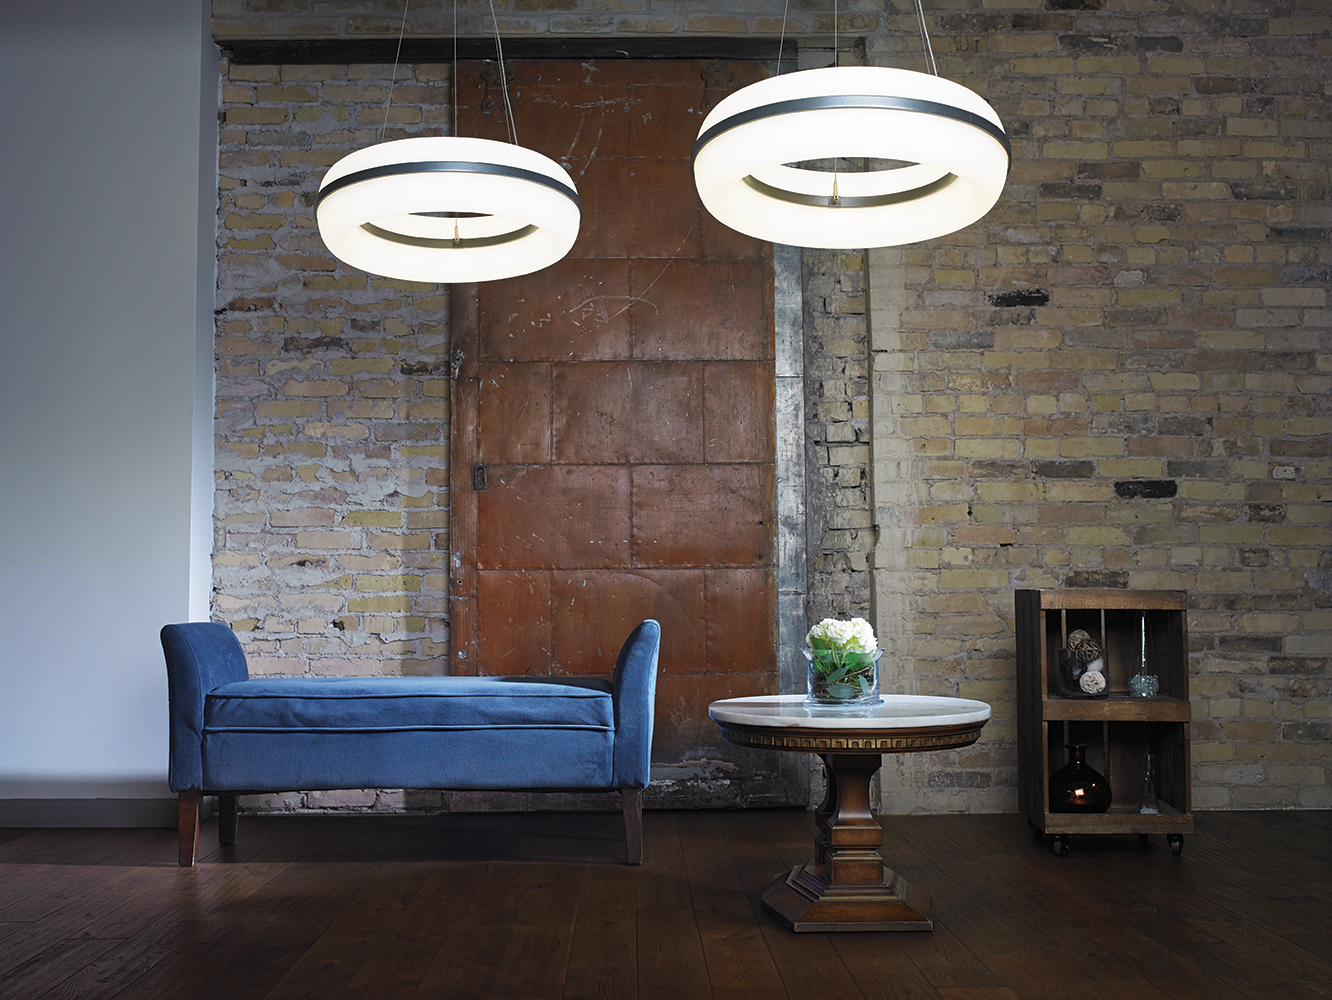 Meridian Round pendant is perfect for hospitality lighting, seen here above a blue sofa in a modern loft.